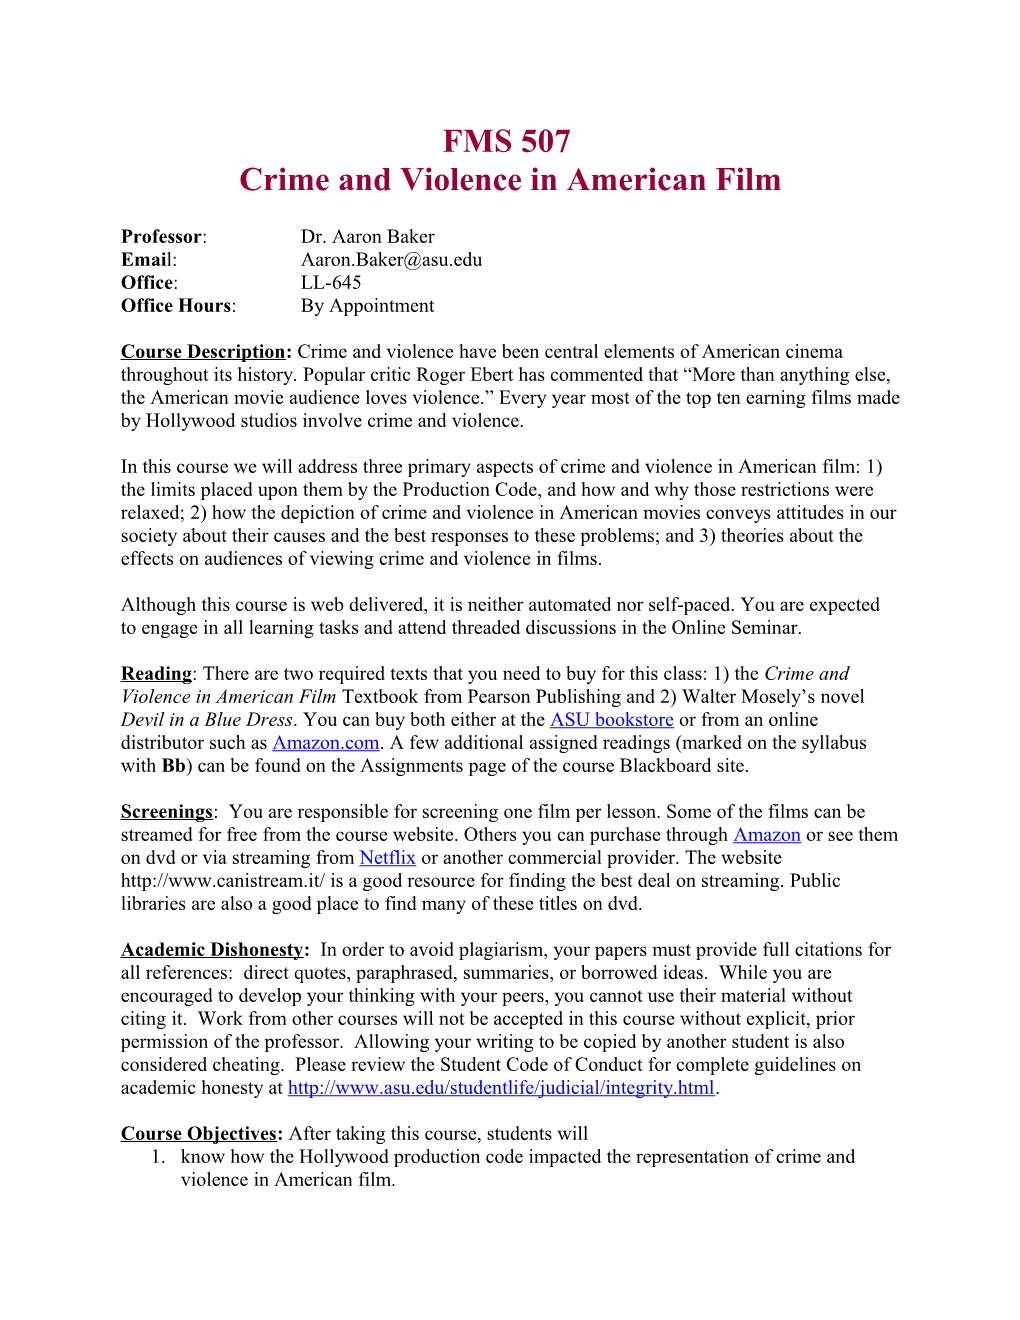 Crime and Violence in American Film